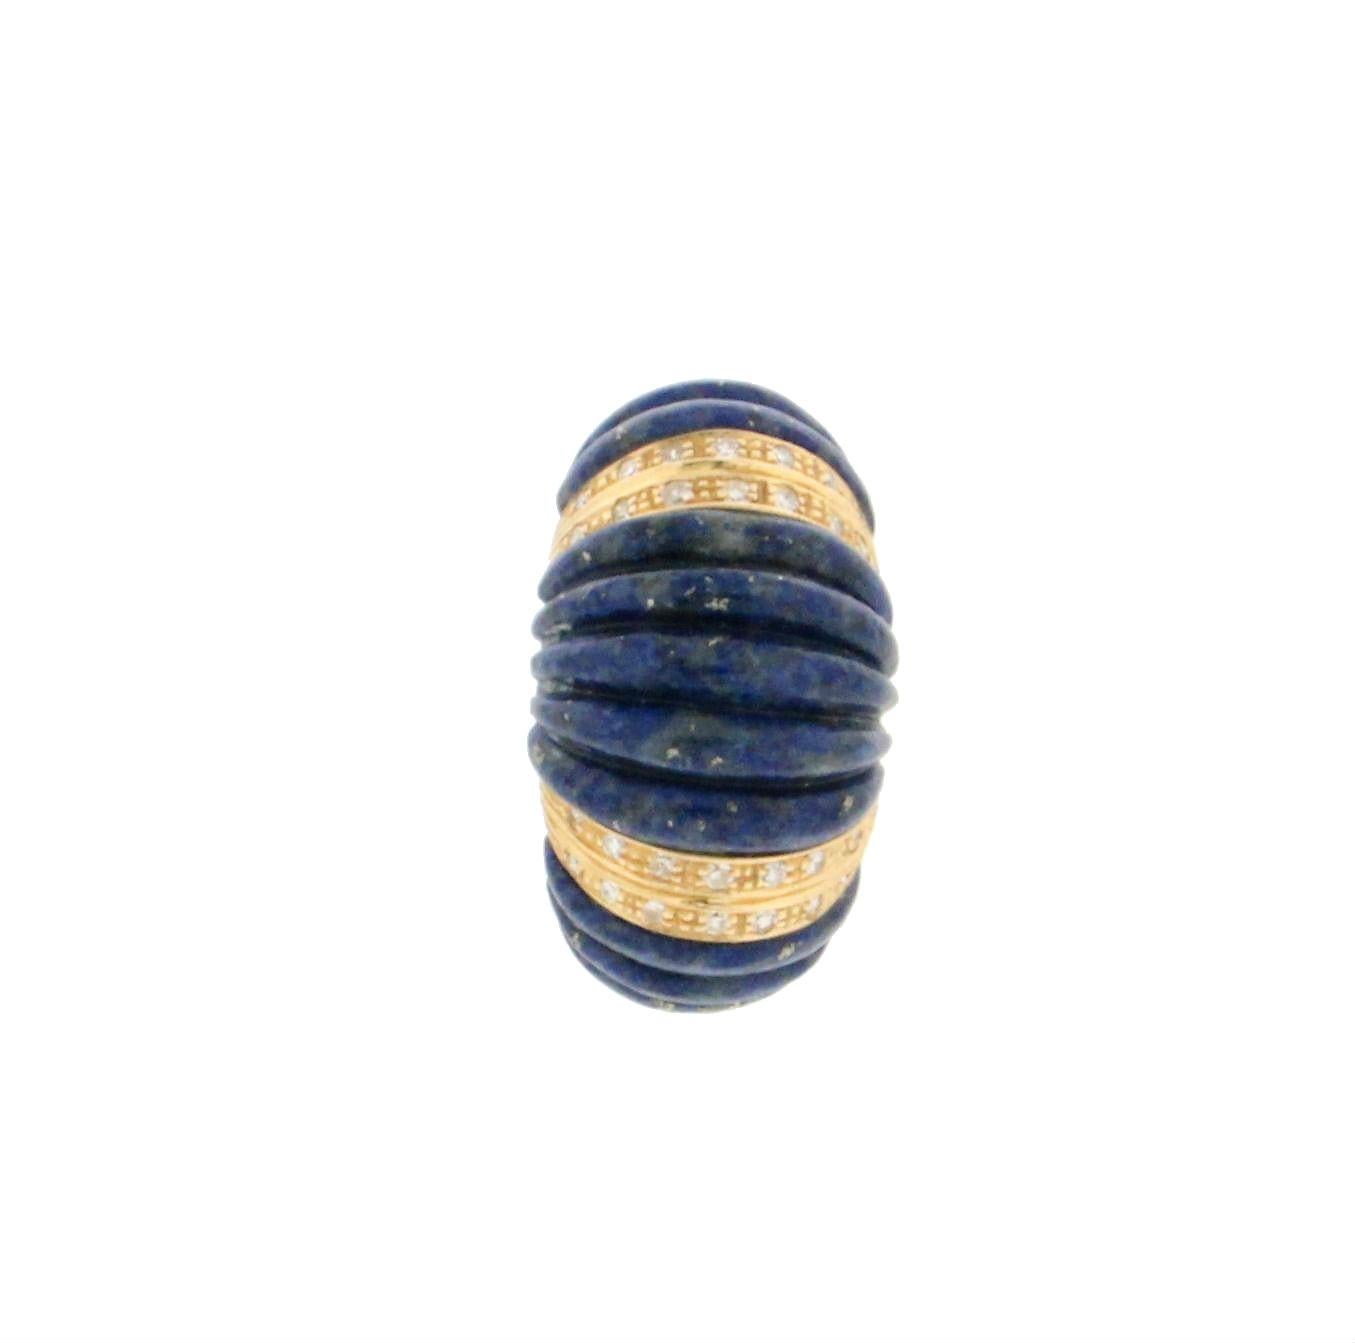 18 karat yellow gold cocktail ring. Handmade by our artisans assembled with lapis lazuli and diamonds.

Ring total weight 13.80 grams
Diamonds weight 0.25 karat
Ring size 19.50 Ita 9 Us
(all rings are can be resized)